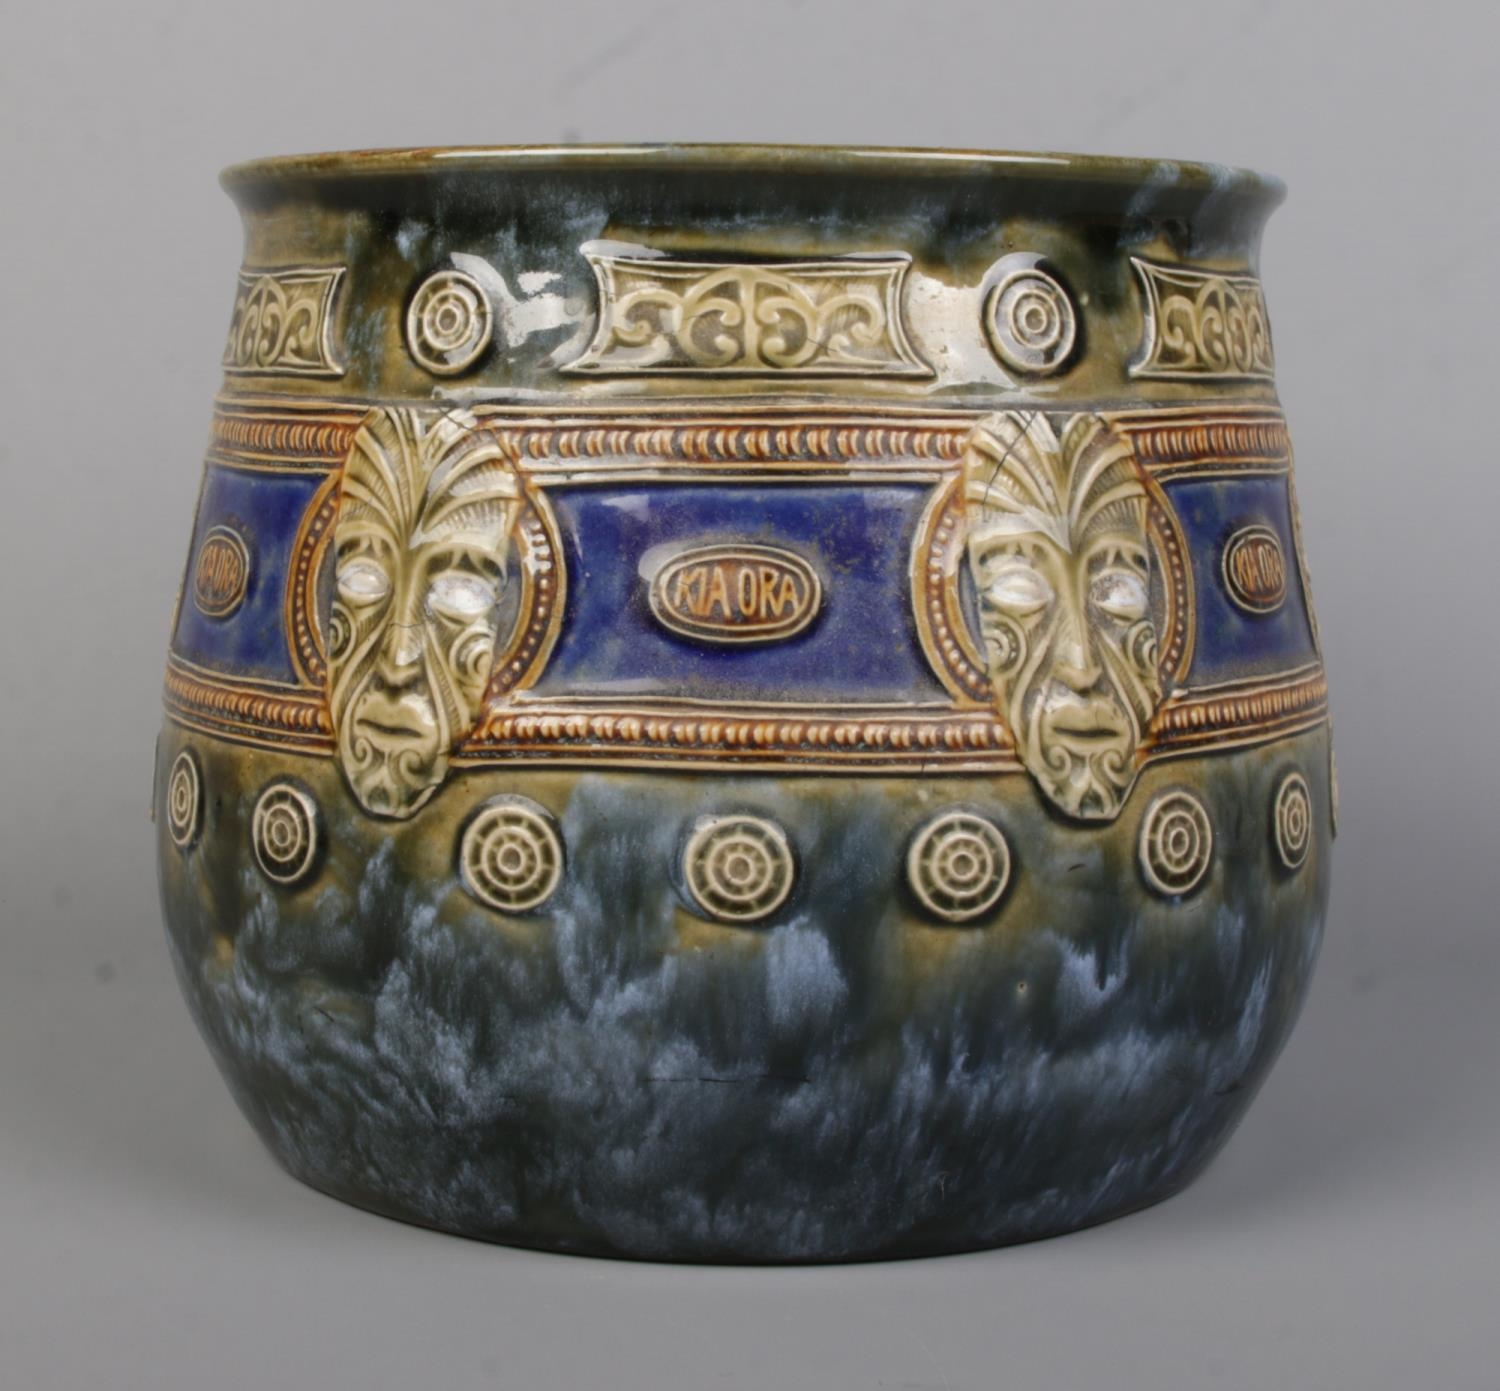 An early 20th century Royal Doulton Maori Ware glazed stoneware jardiniere. Decorated with mask